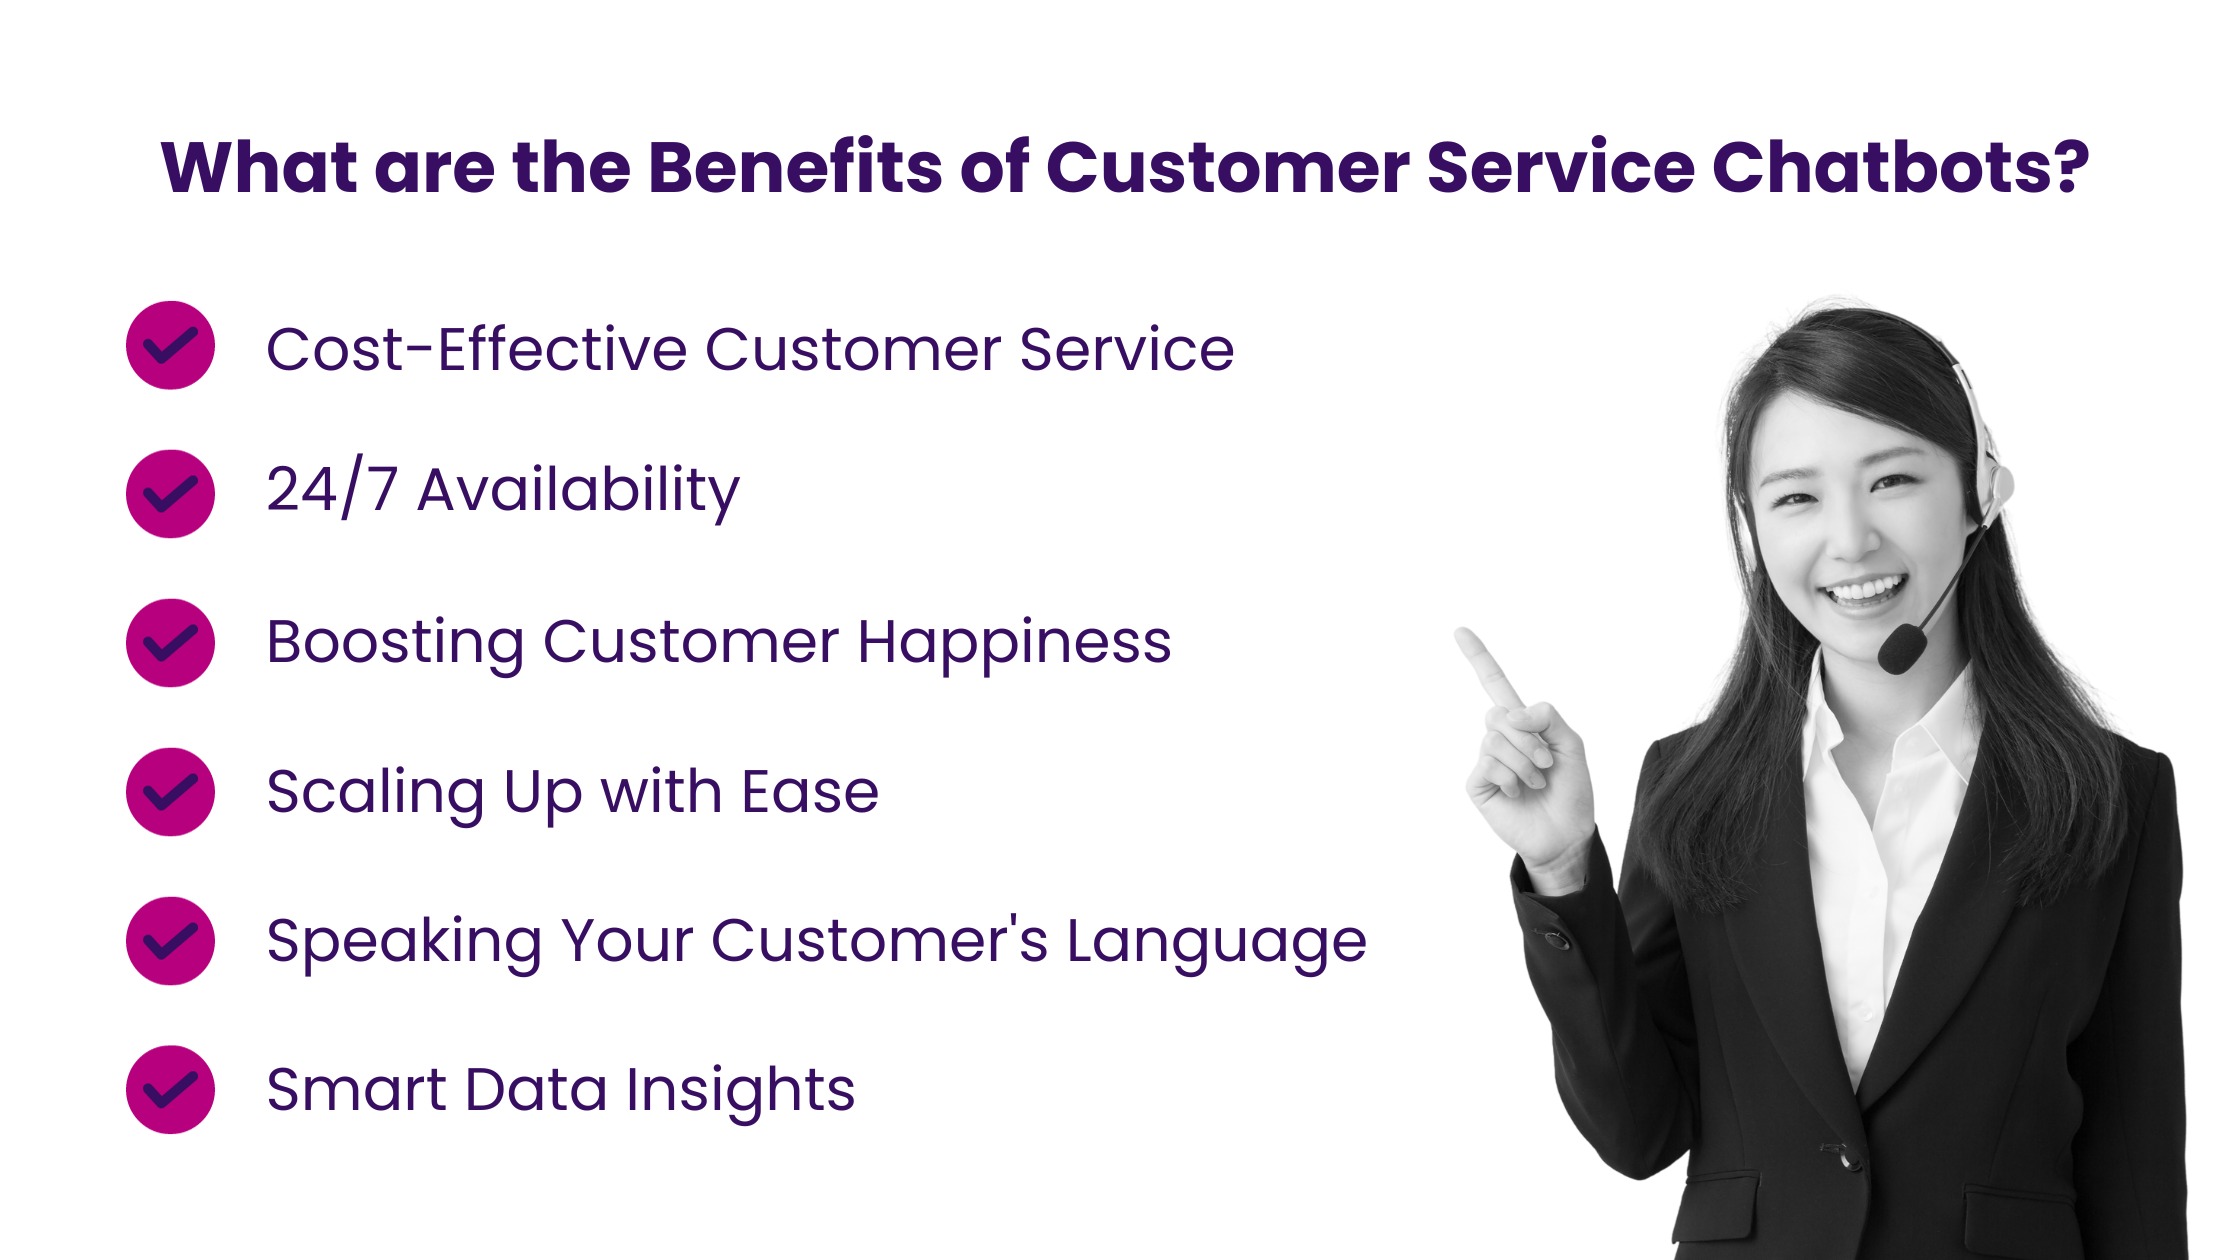 What are the Benefits of Customer Service Chatbots